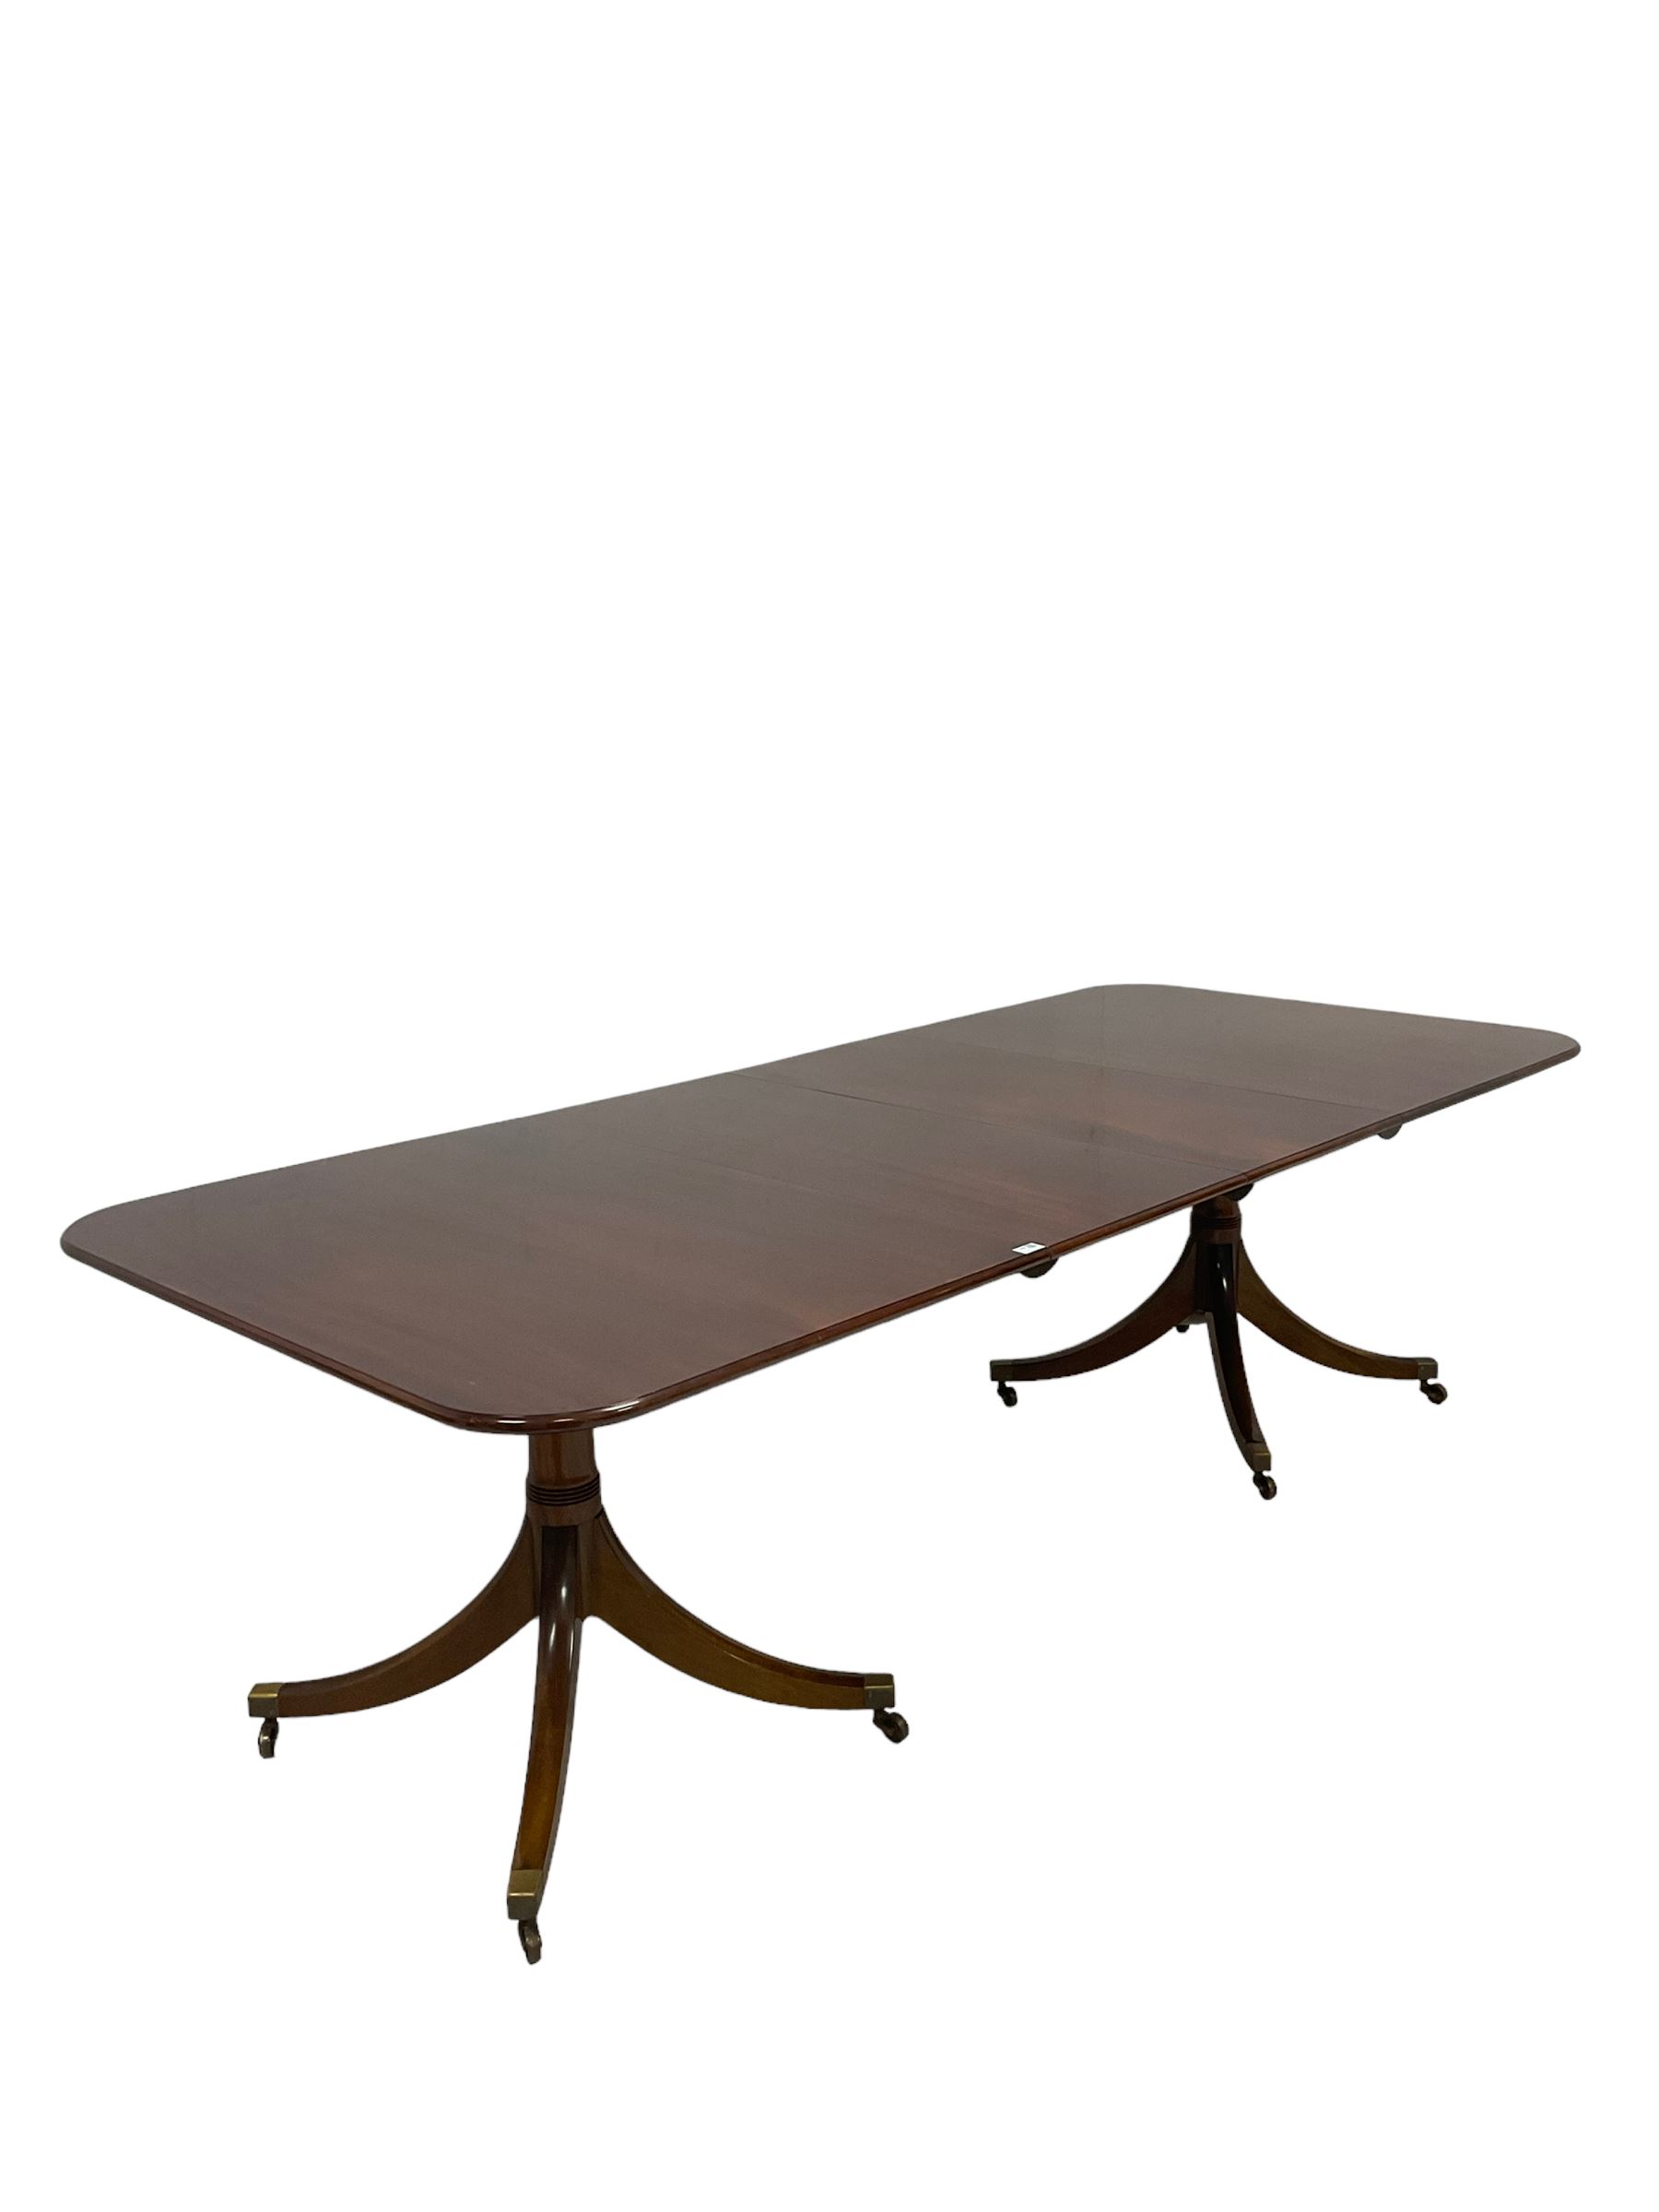 William Tillman - mahogany twin pillar dining table with two additional leaves - Image 15 of 16